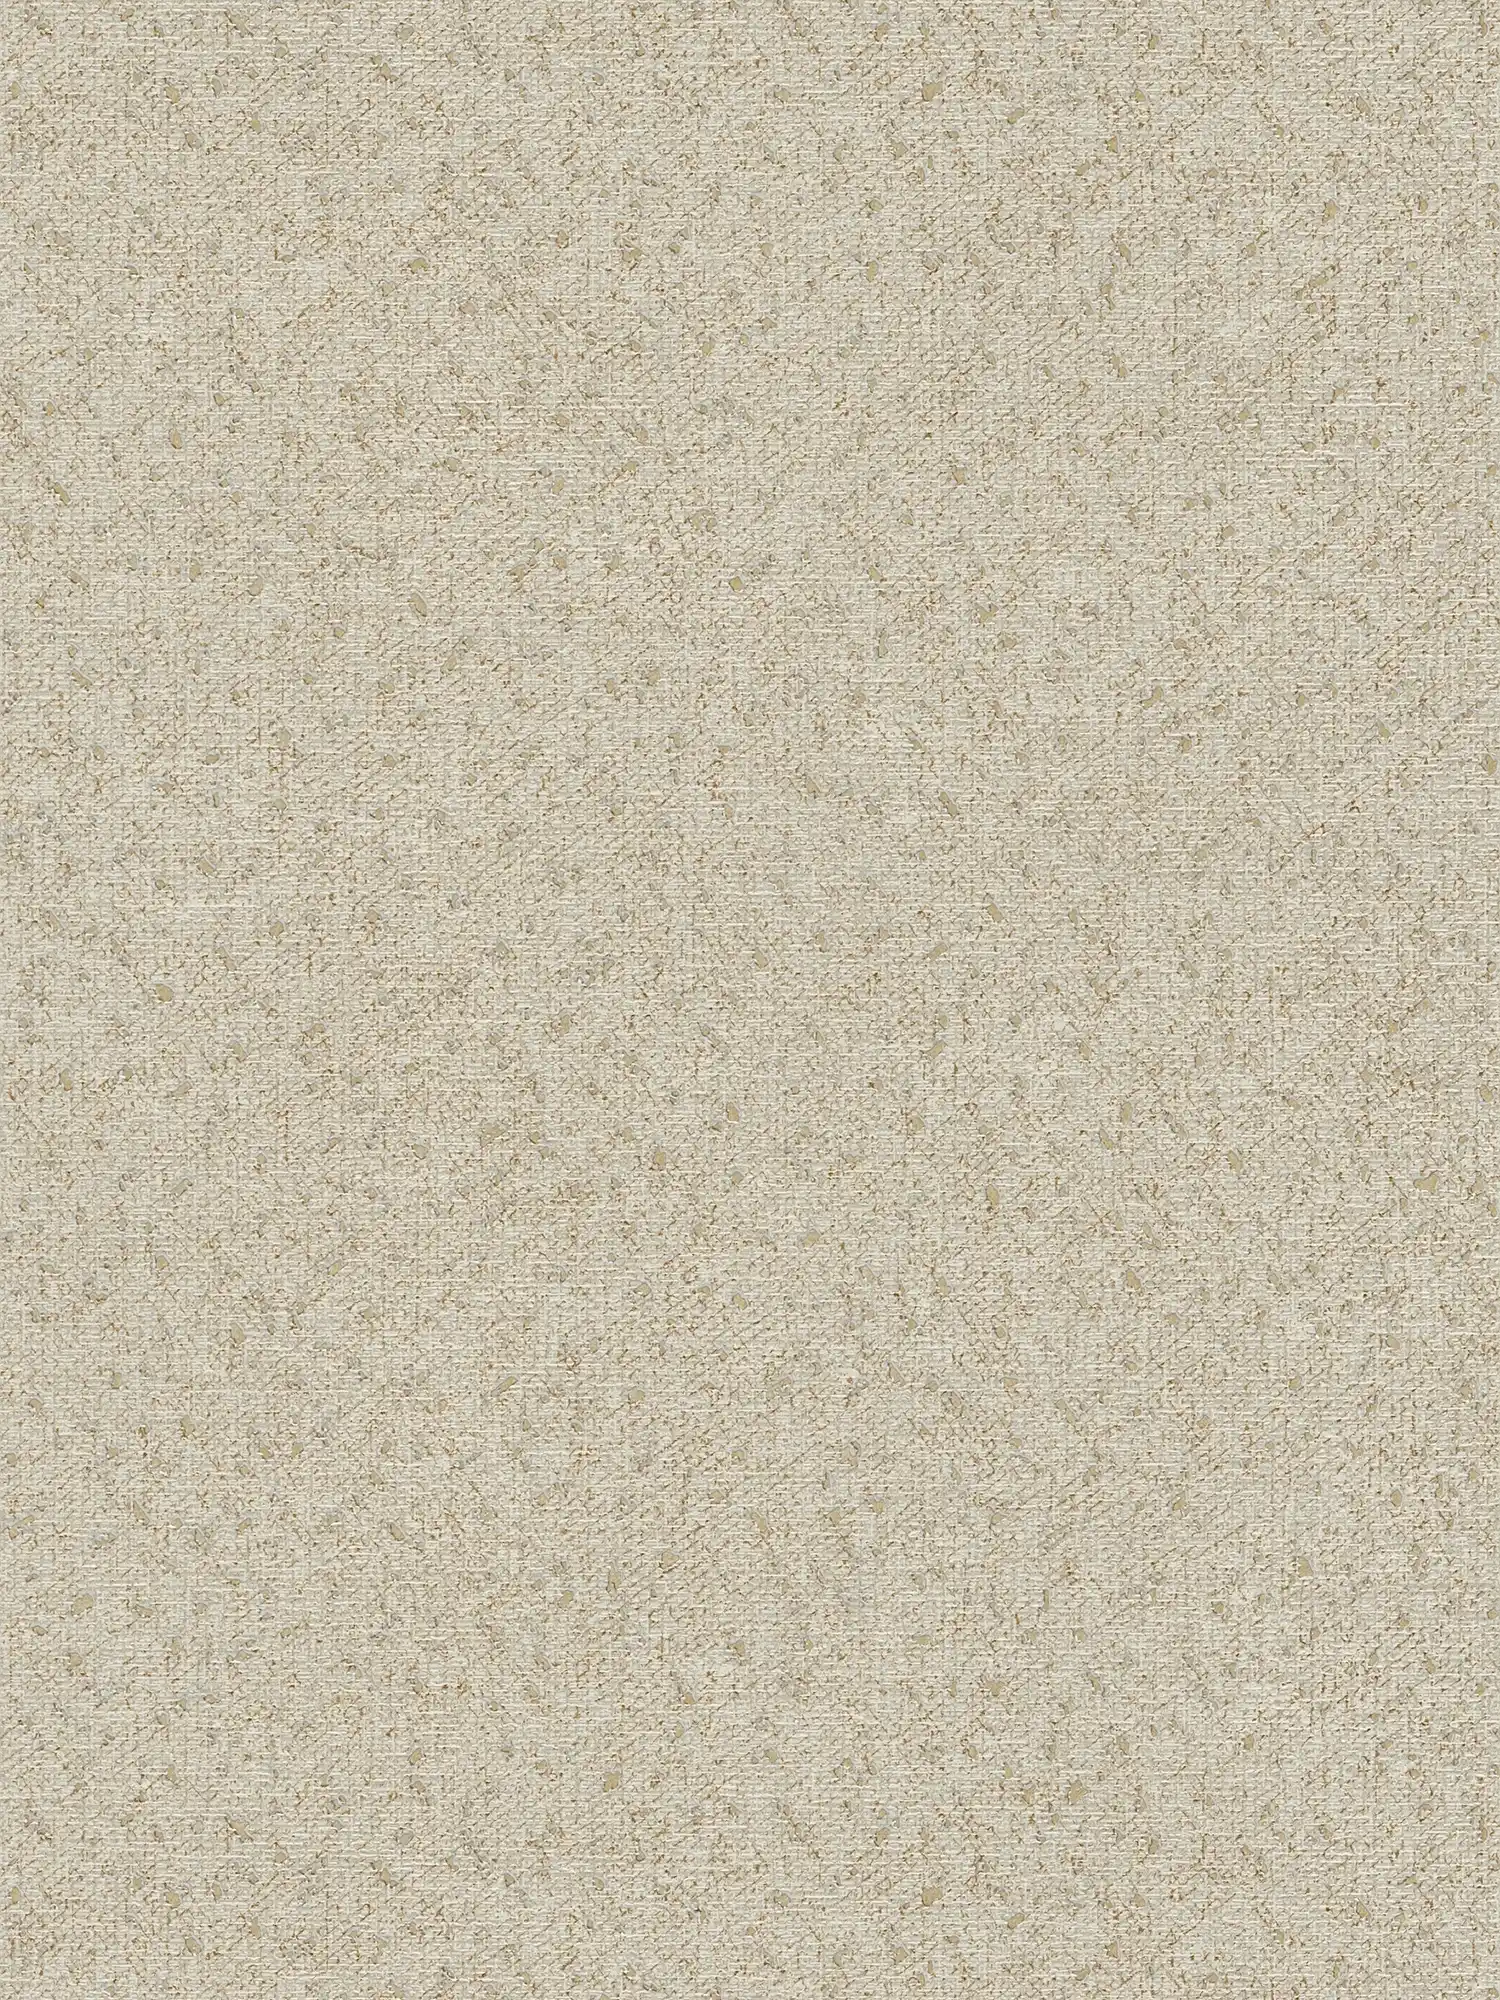 Wallpaper with textile structure and metallic accent - beige, grey
